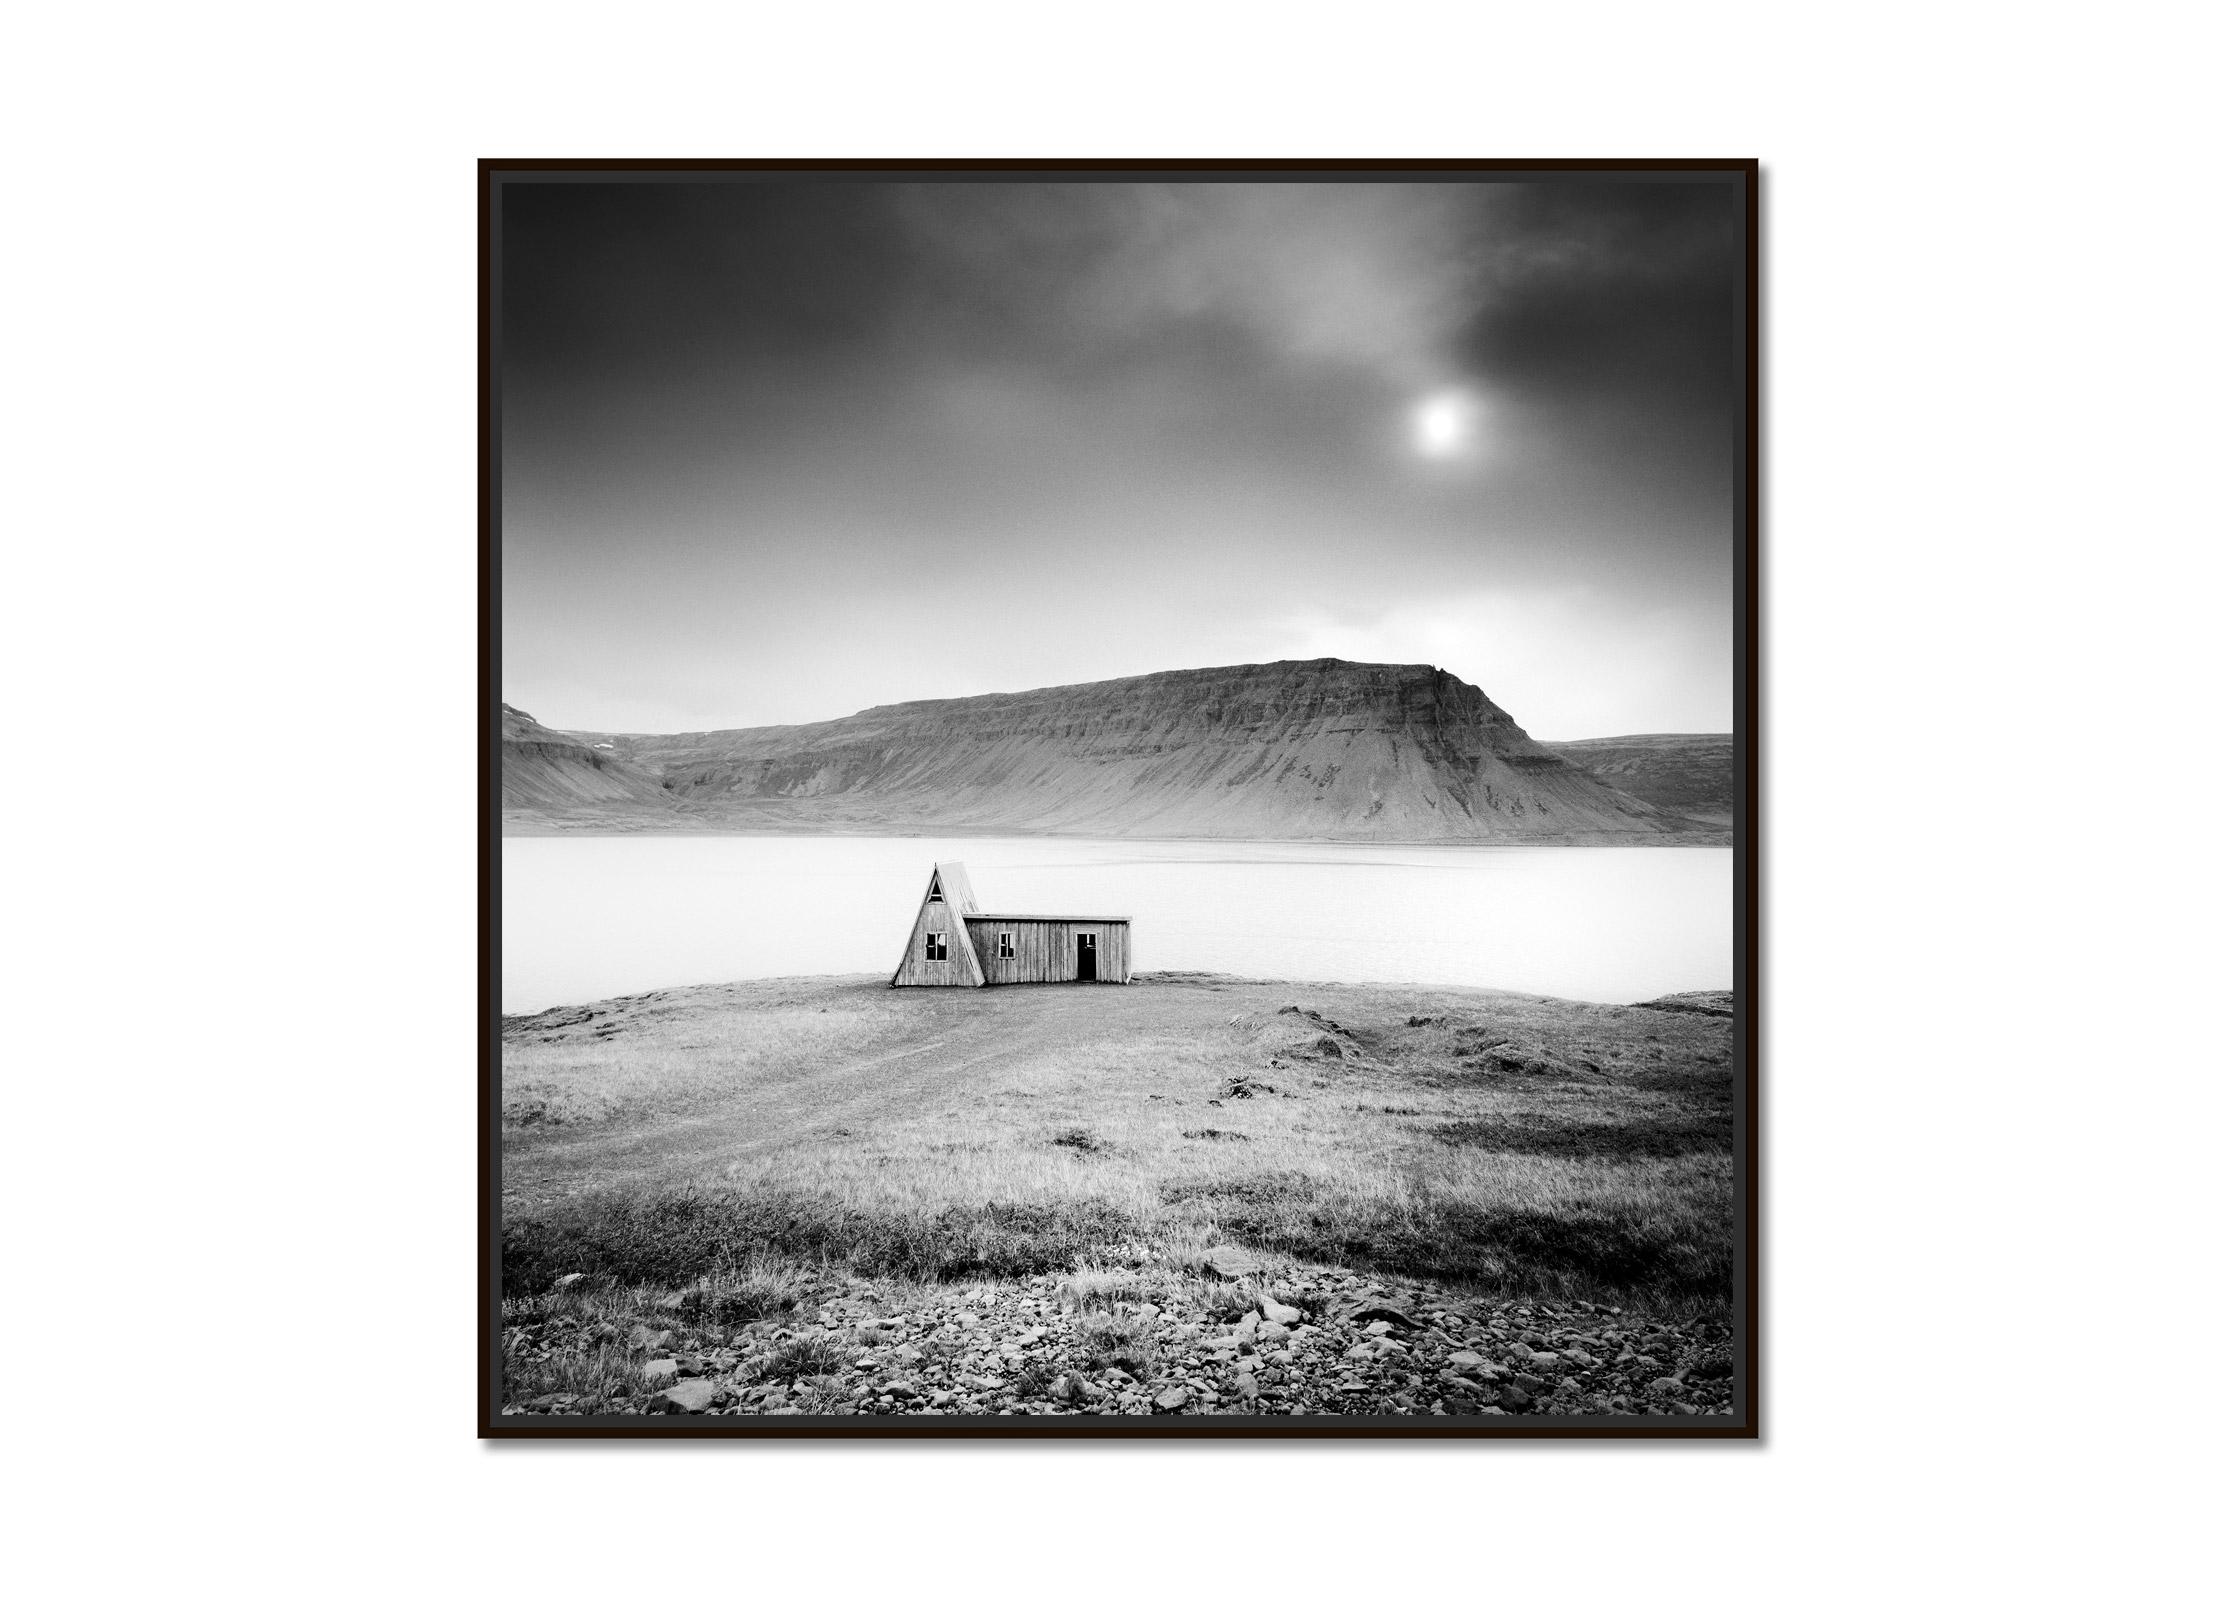 Abandoned Farmhouse, Iceland, black and white fine art landscape photography  - Photograph by Gerald Berghammer